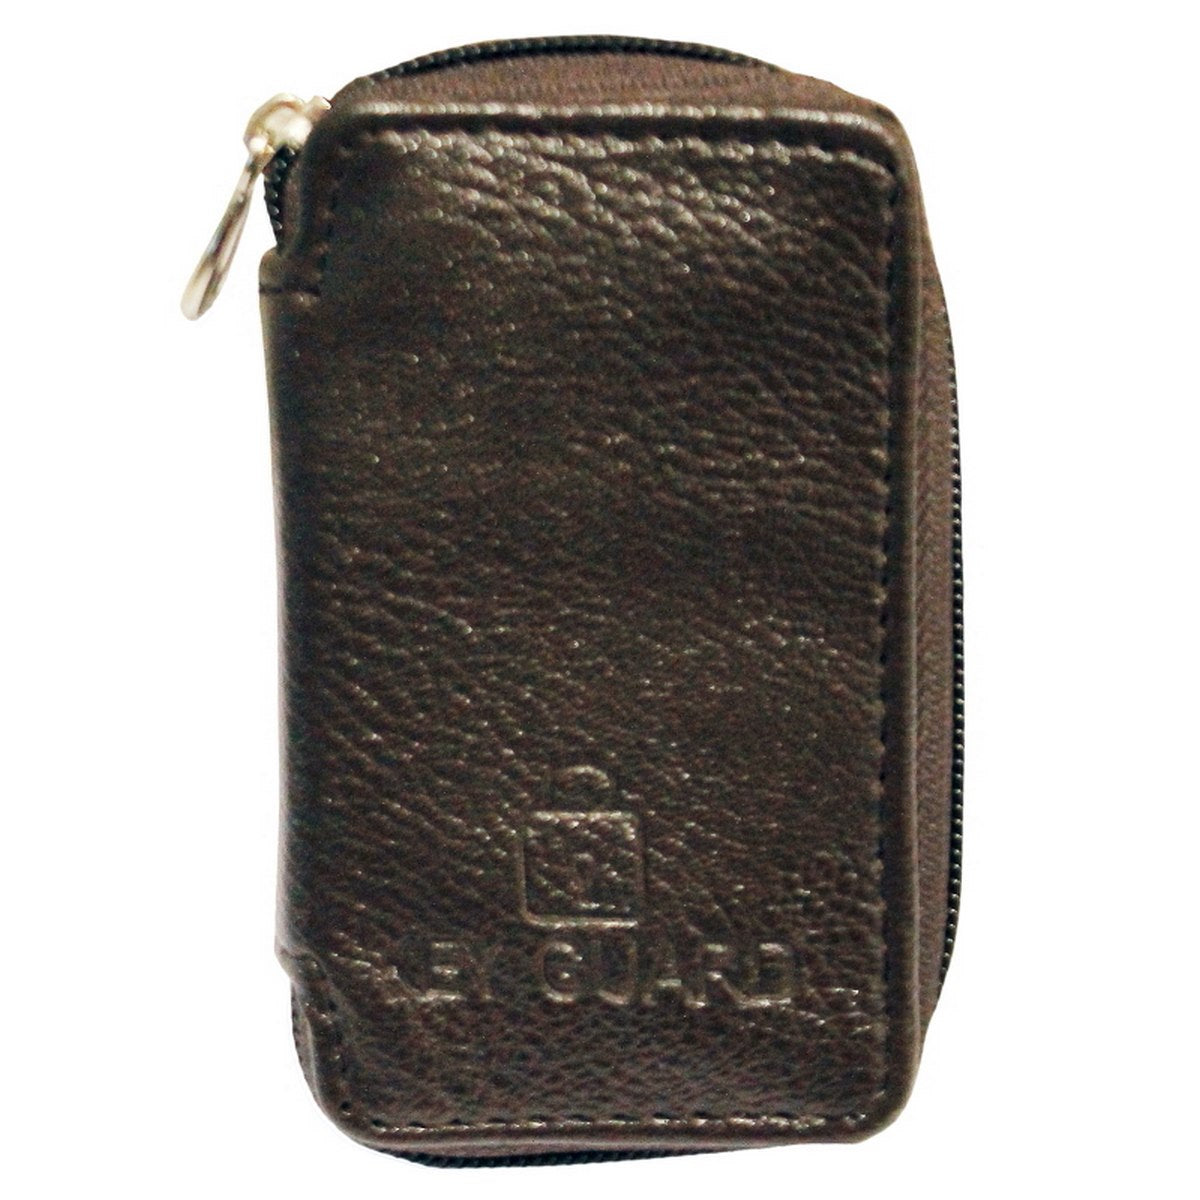 Brown 4 Inch Key Holder Guard Case - For Office Use, Personal Use, Corporate Gifting, Return Gift